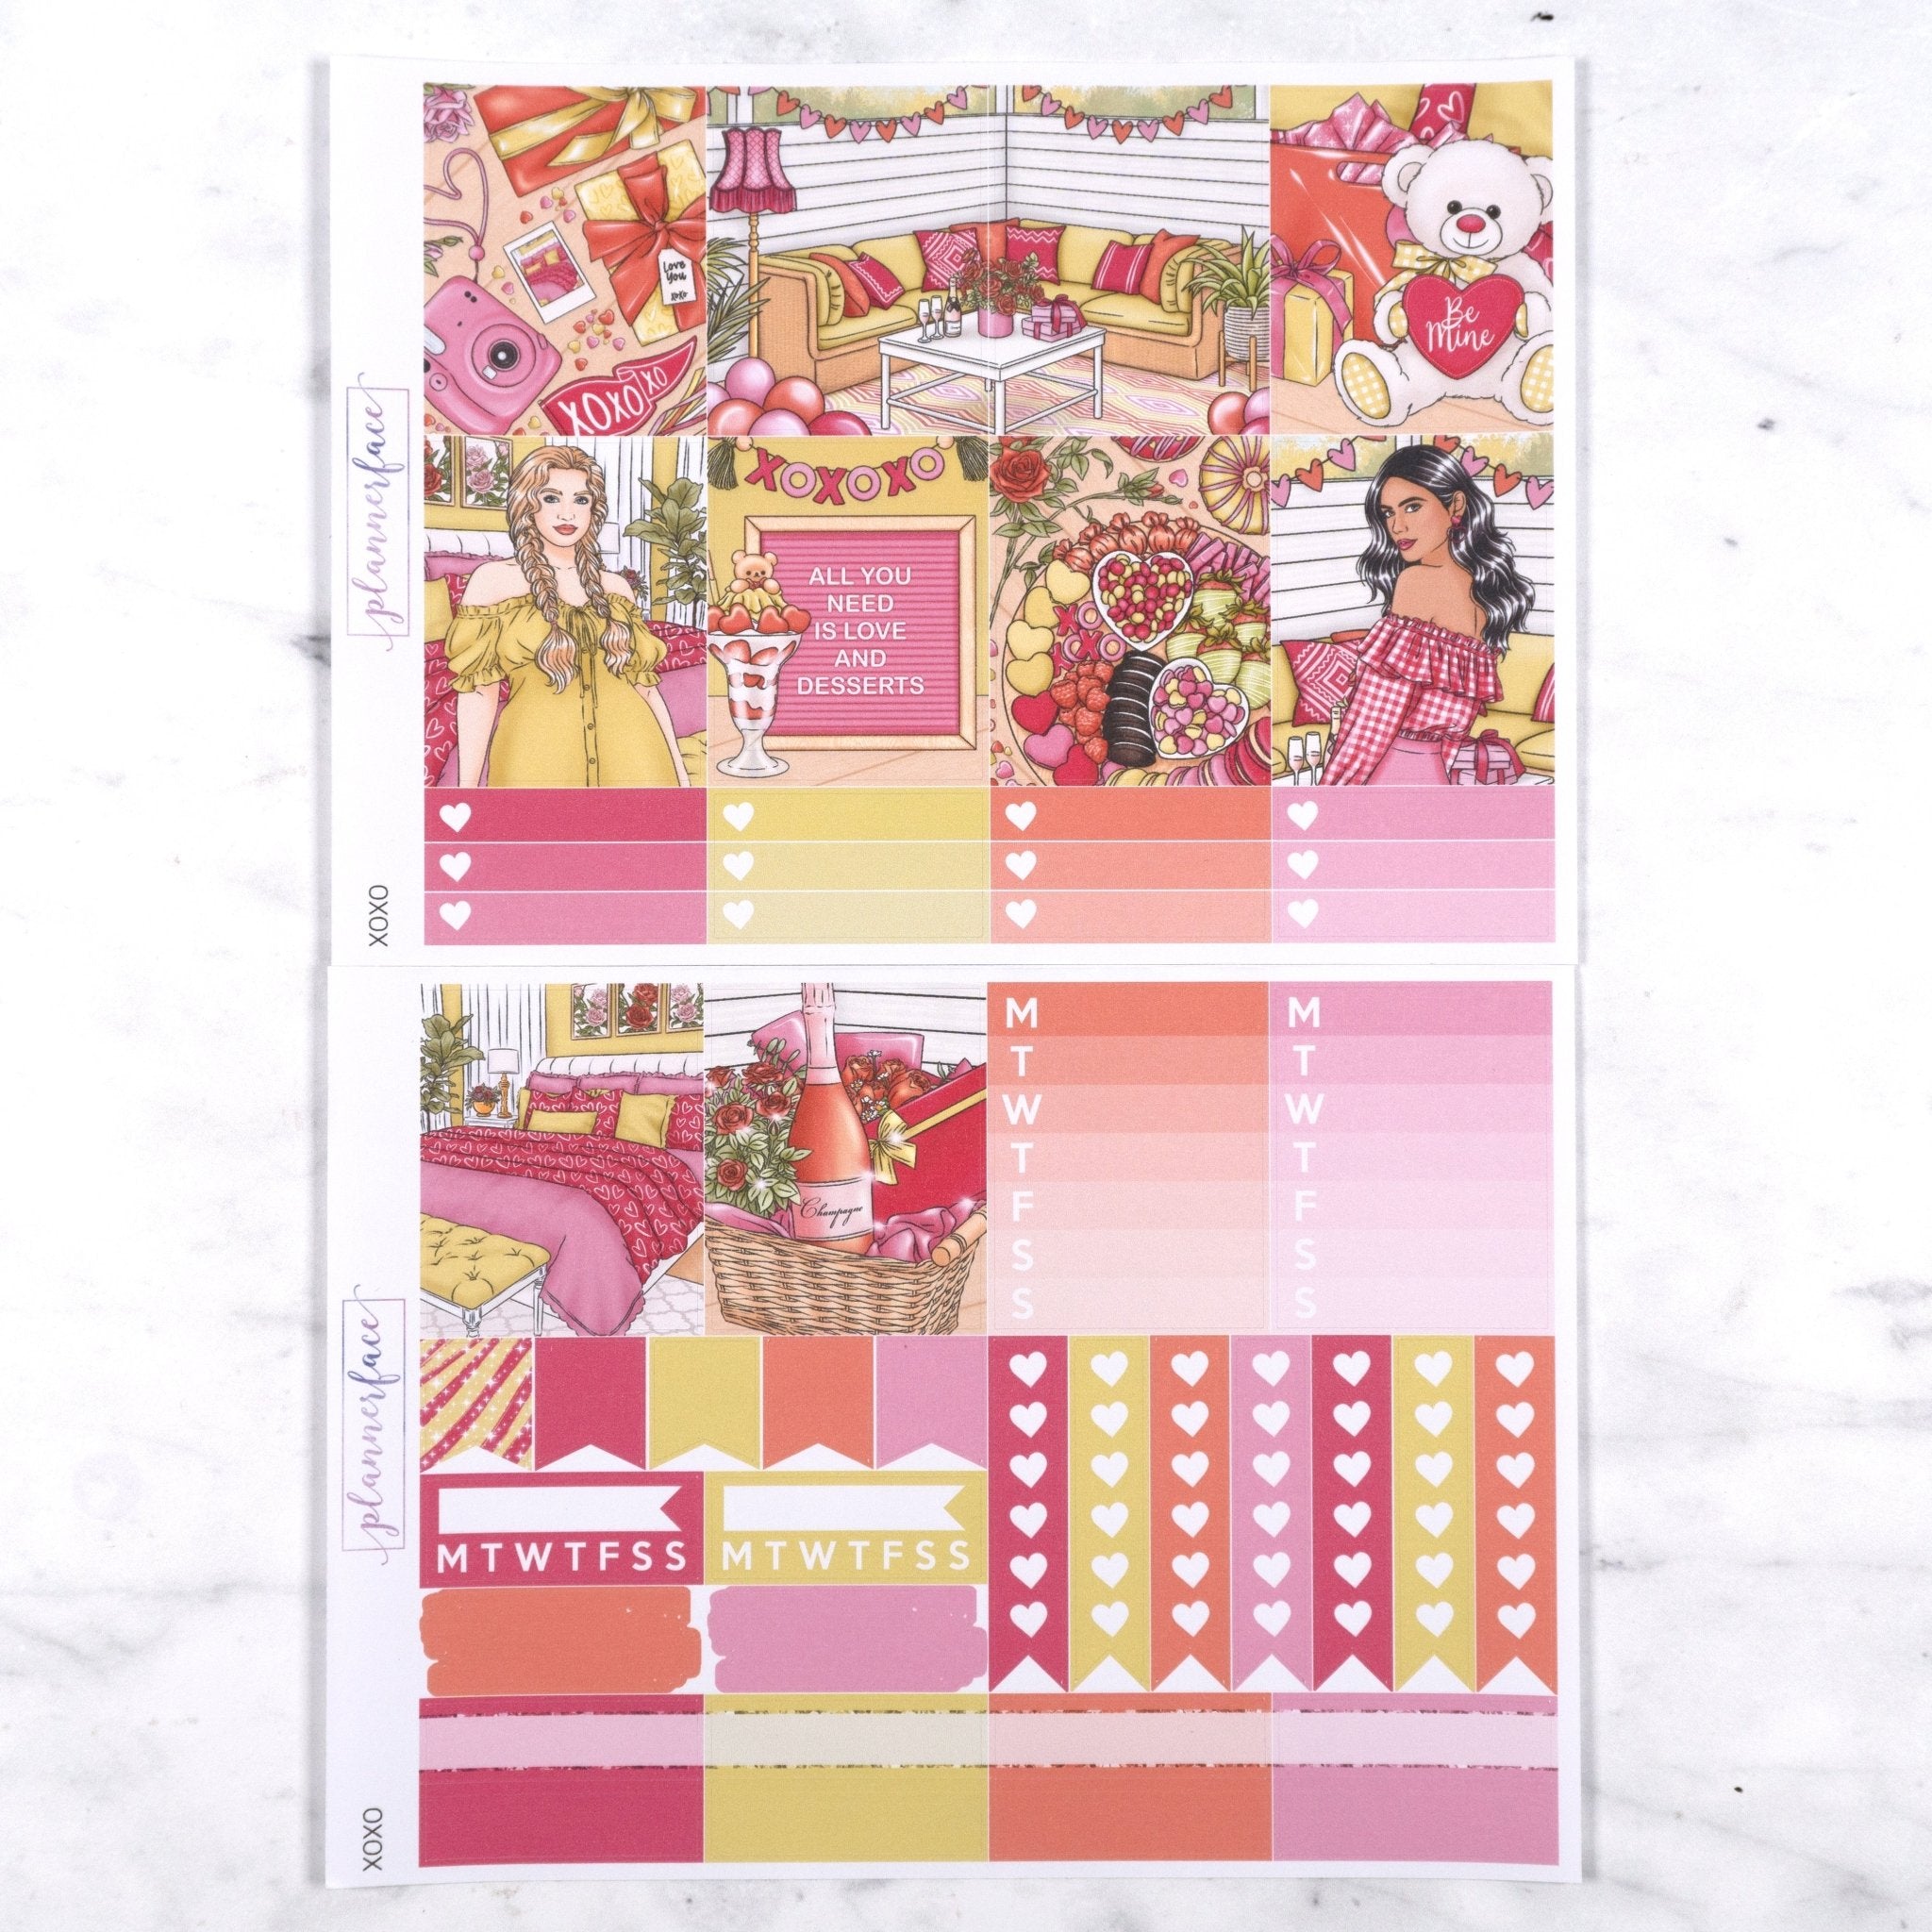 XOXO Weekly Kit by Plannerface